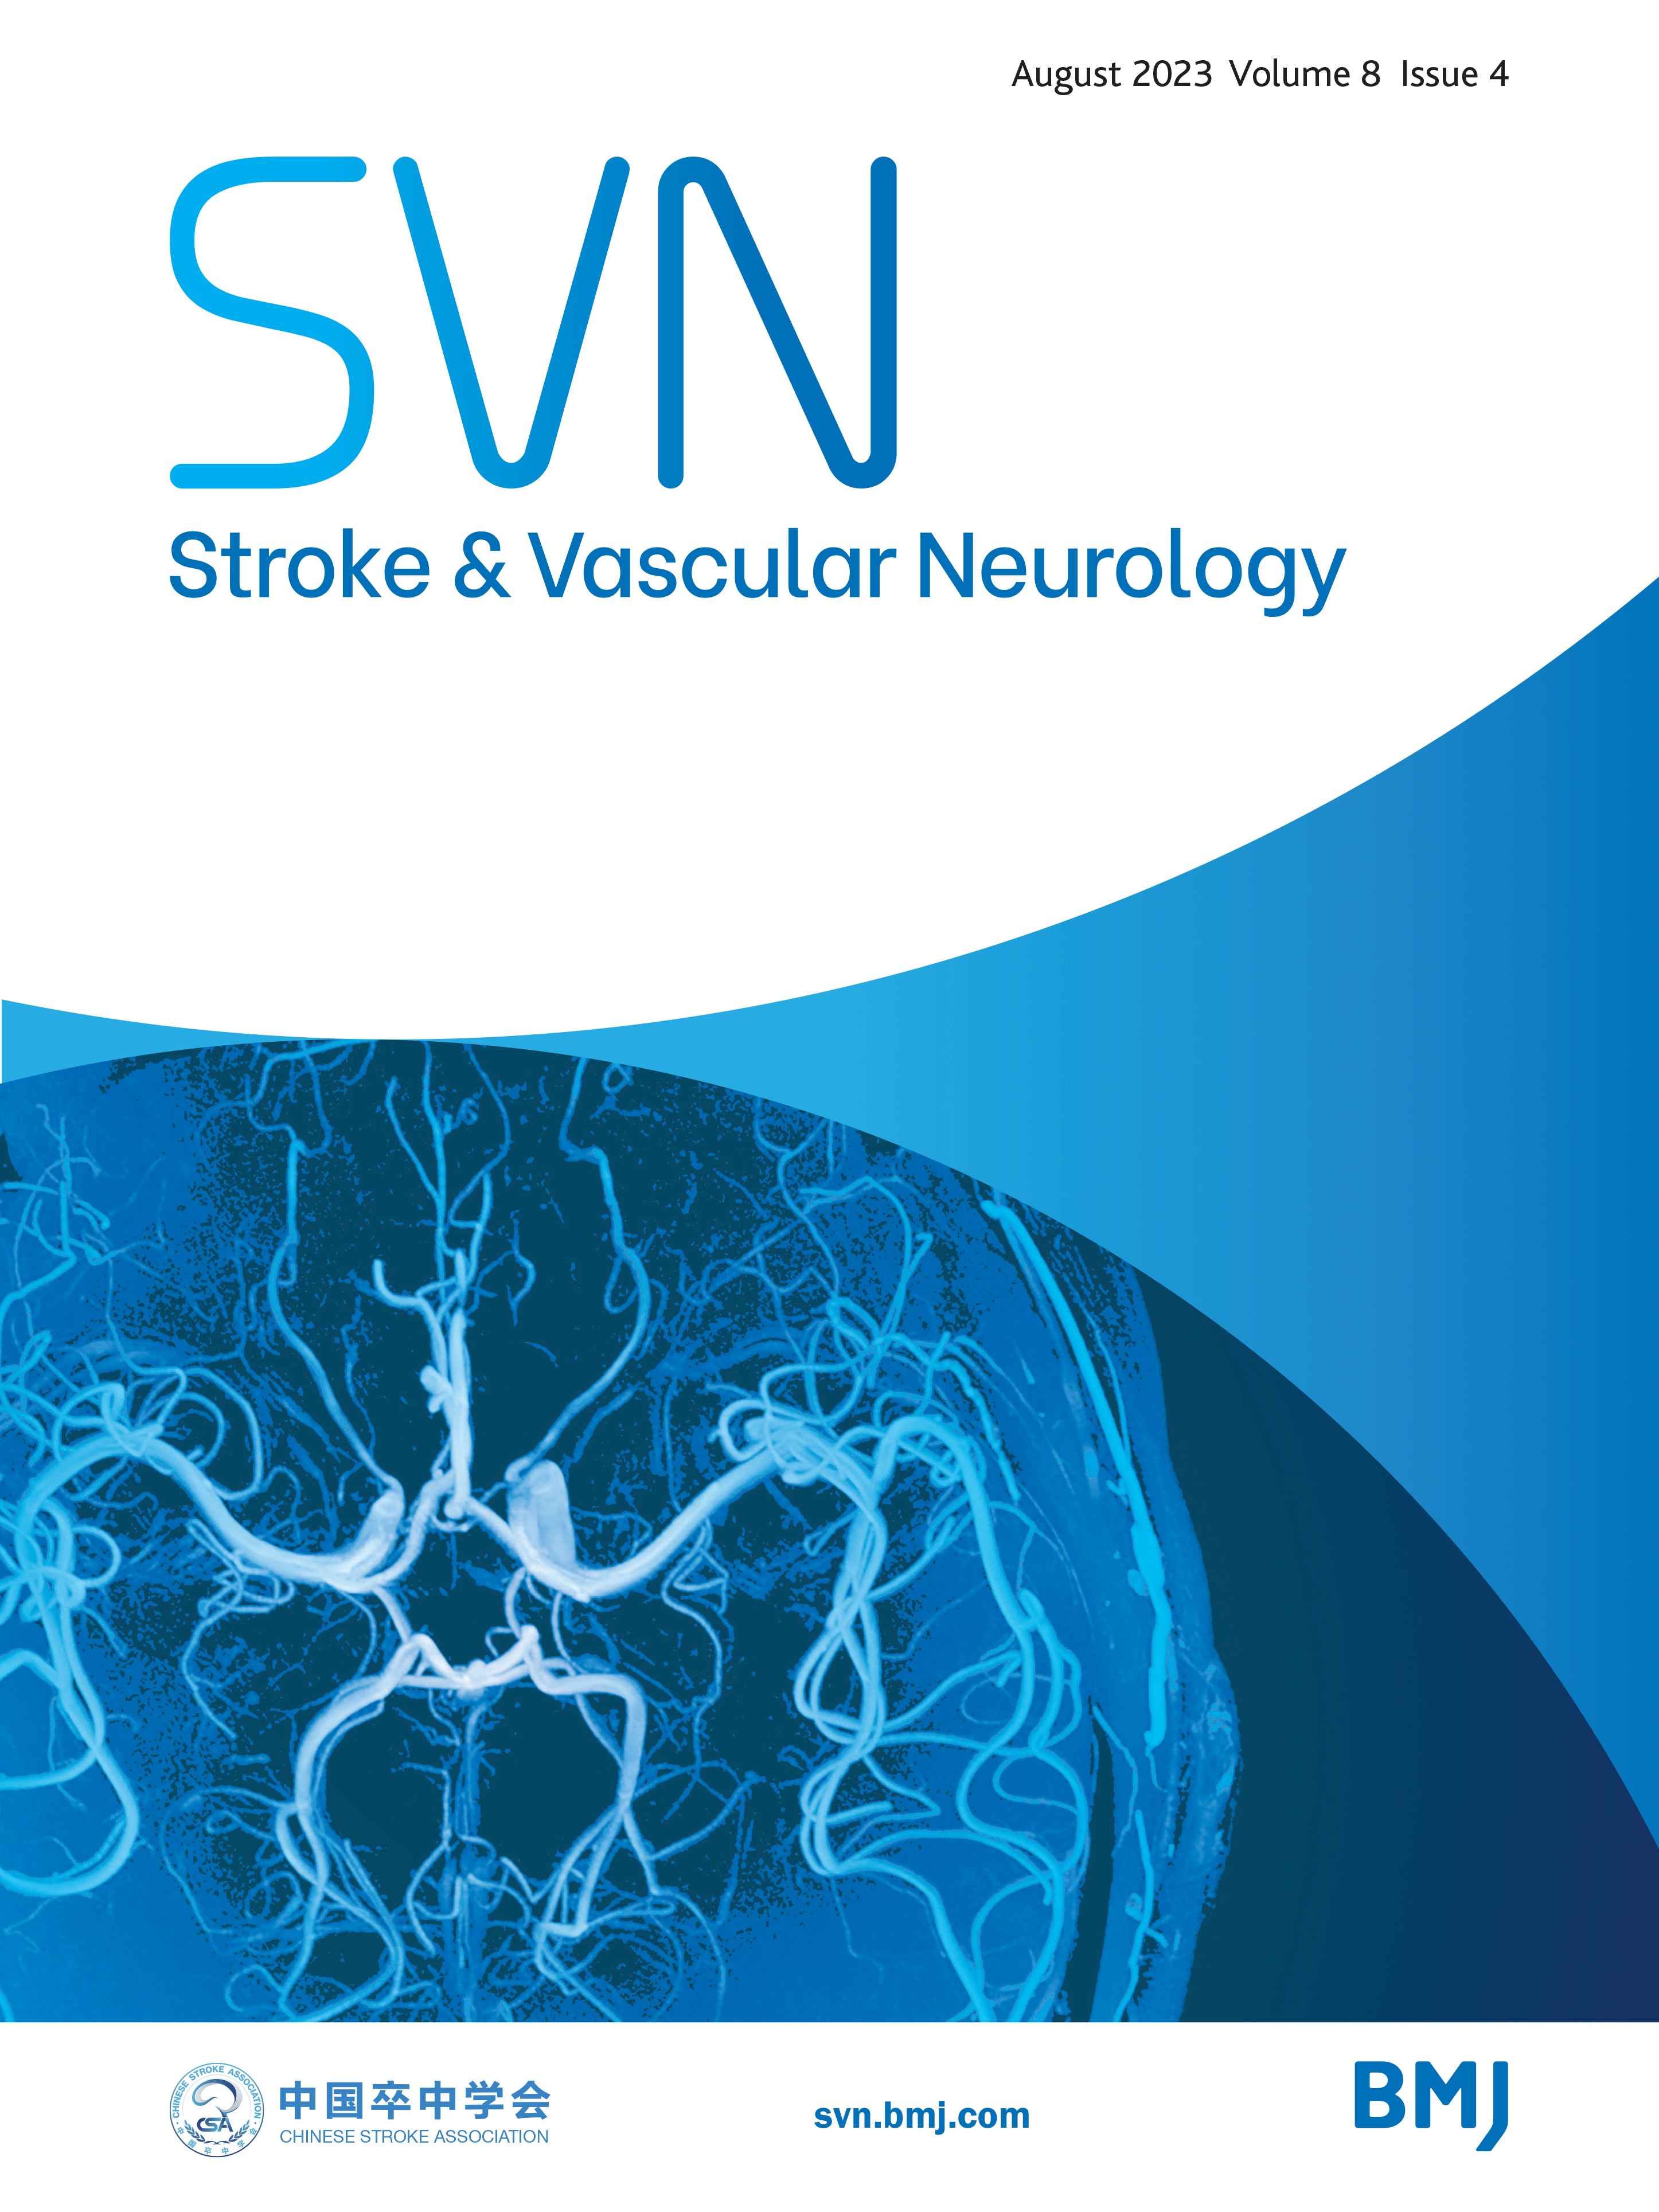 Association between statin therapy and the risk of stroke in patients with moyamoya disease: a nationwide cohort study